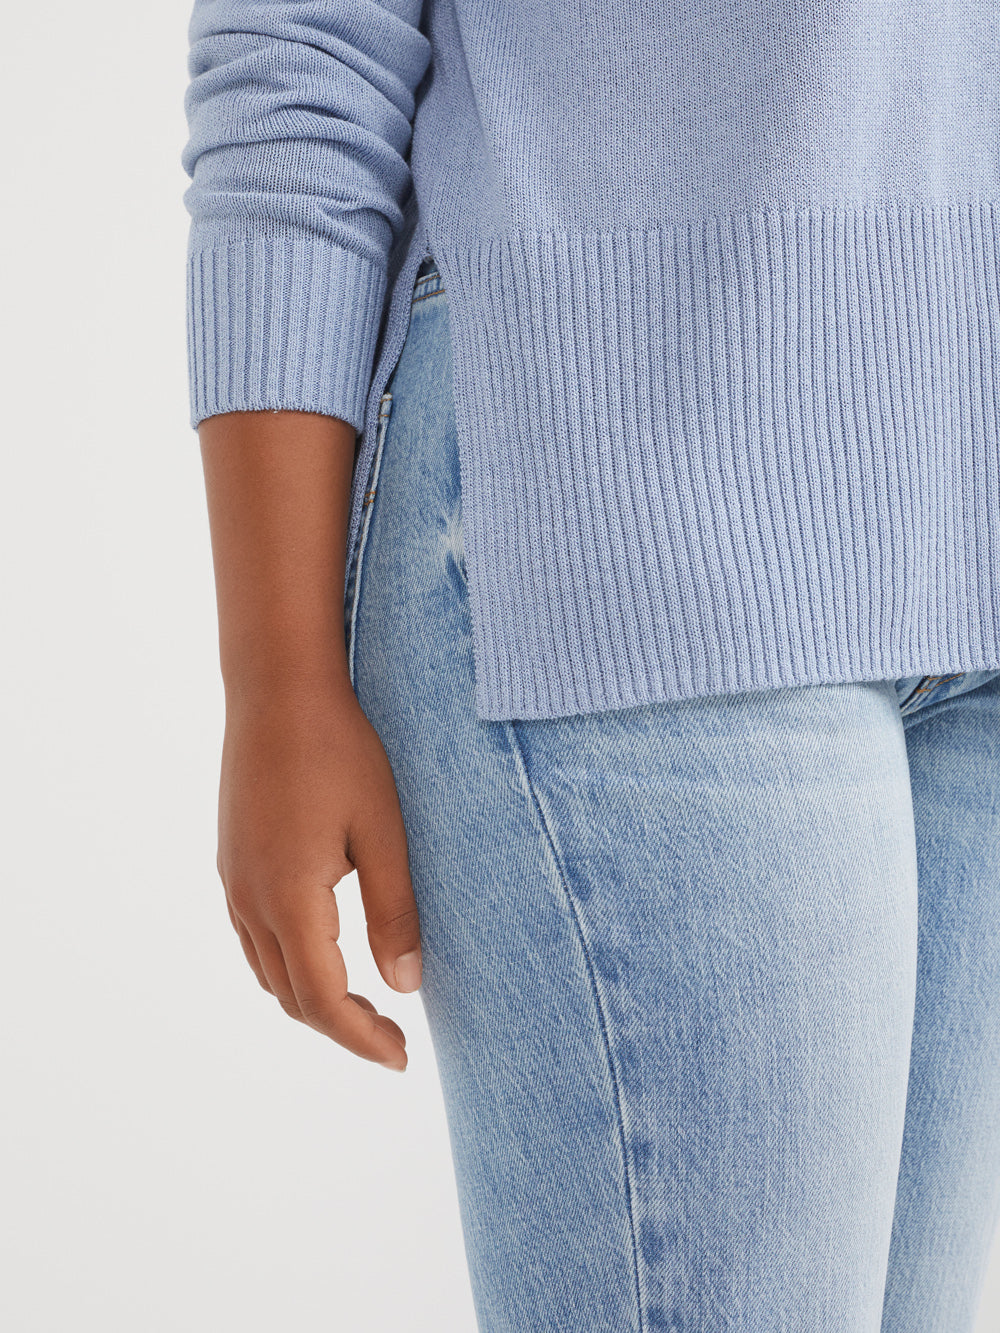 The Relaxed V-Neck Pullover